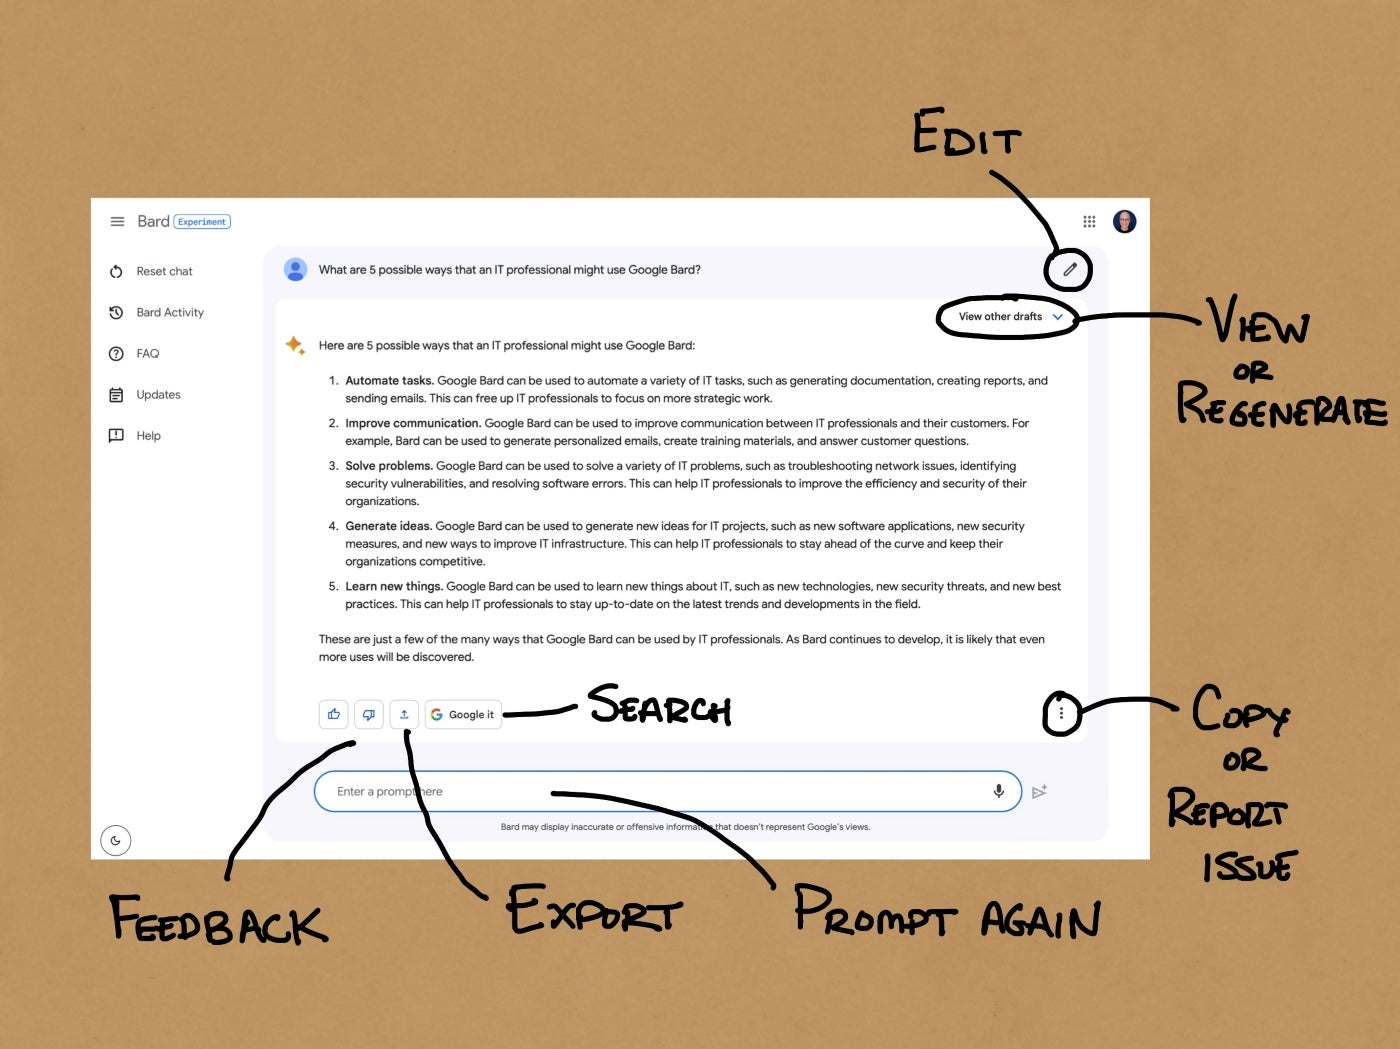 Google Bard response with annotations pointing out that users can edit, view or regenerate, search, provide feedback, report, export, or copy the response